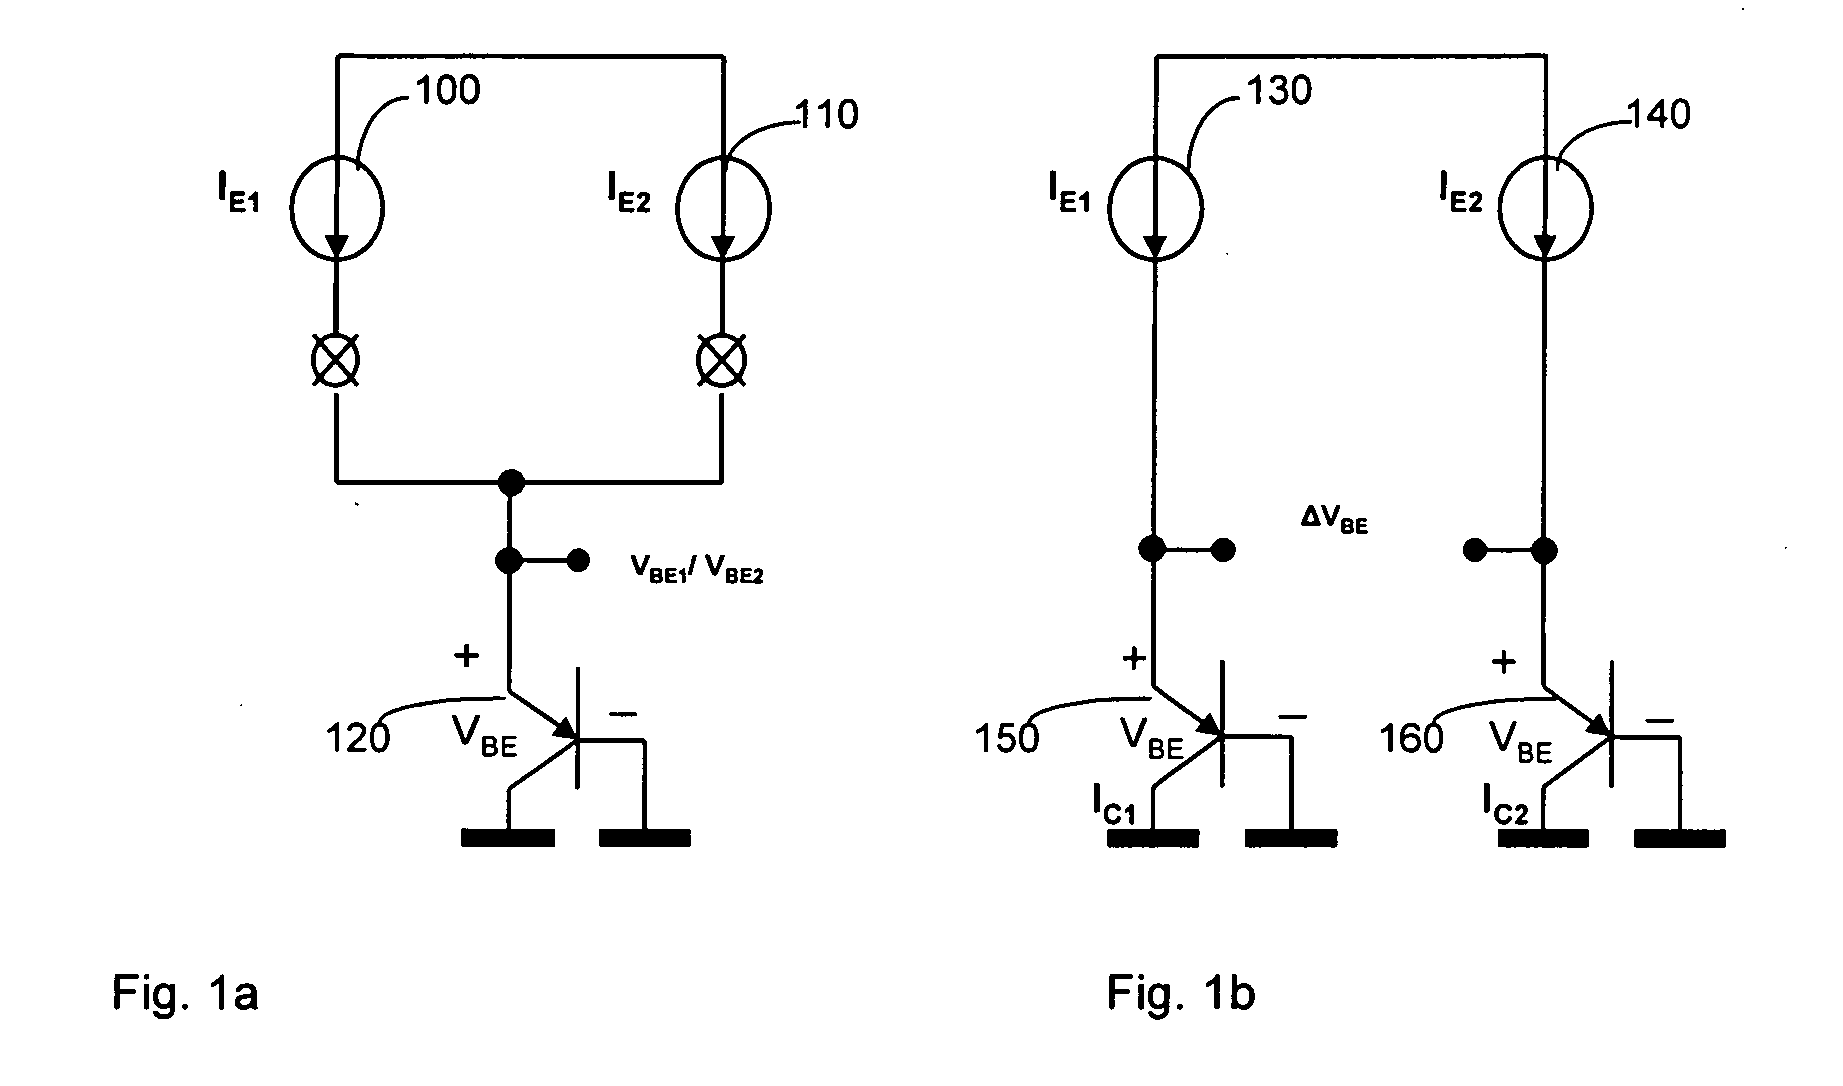 System and method for n'th order digital piece-wise linear compensation of the variations with temperature of the non-linearities for high accuracy digital temperature sensors in an extended temperature range